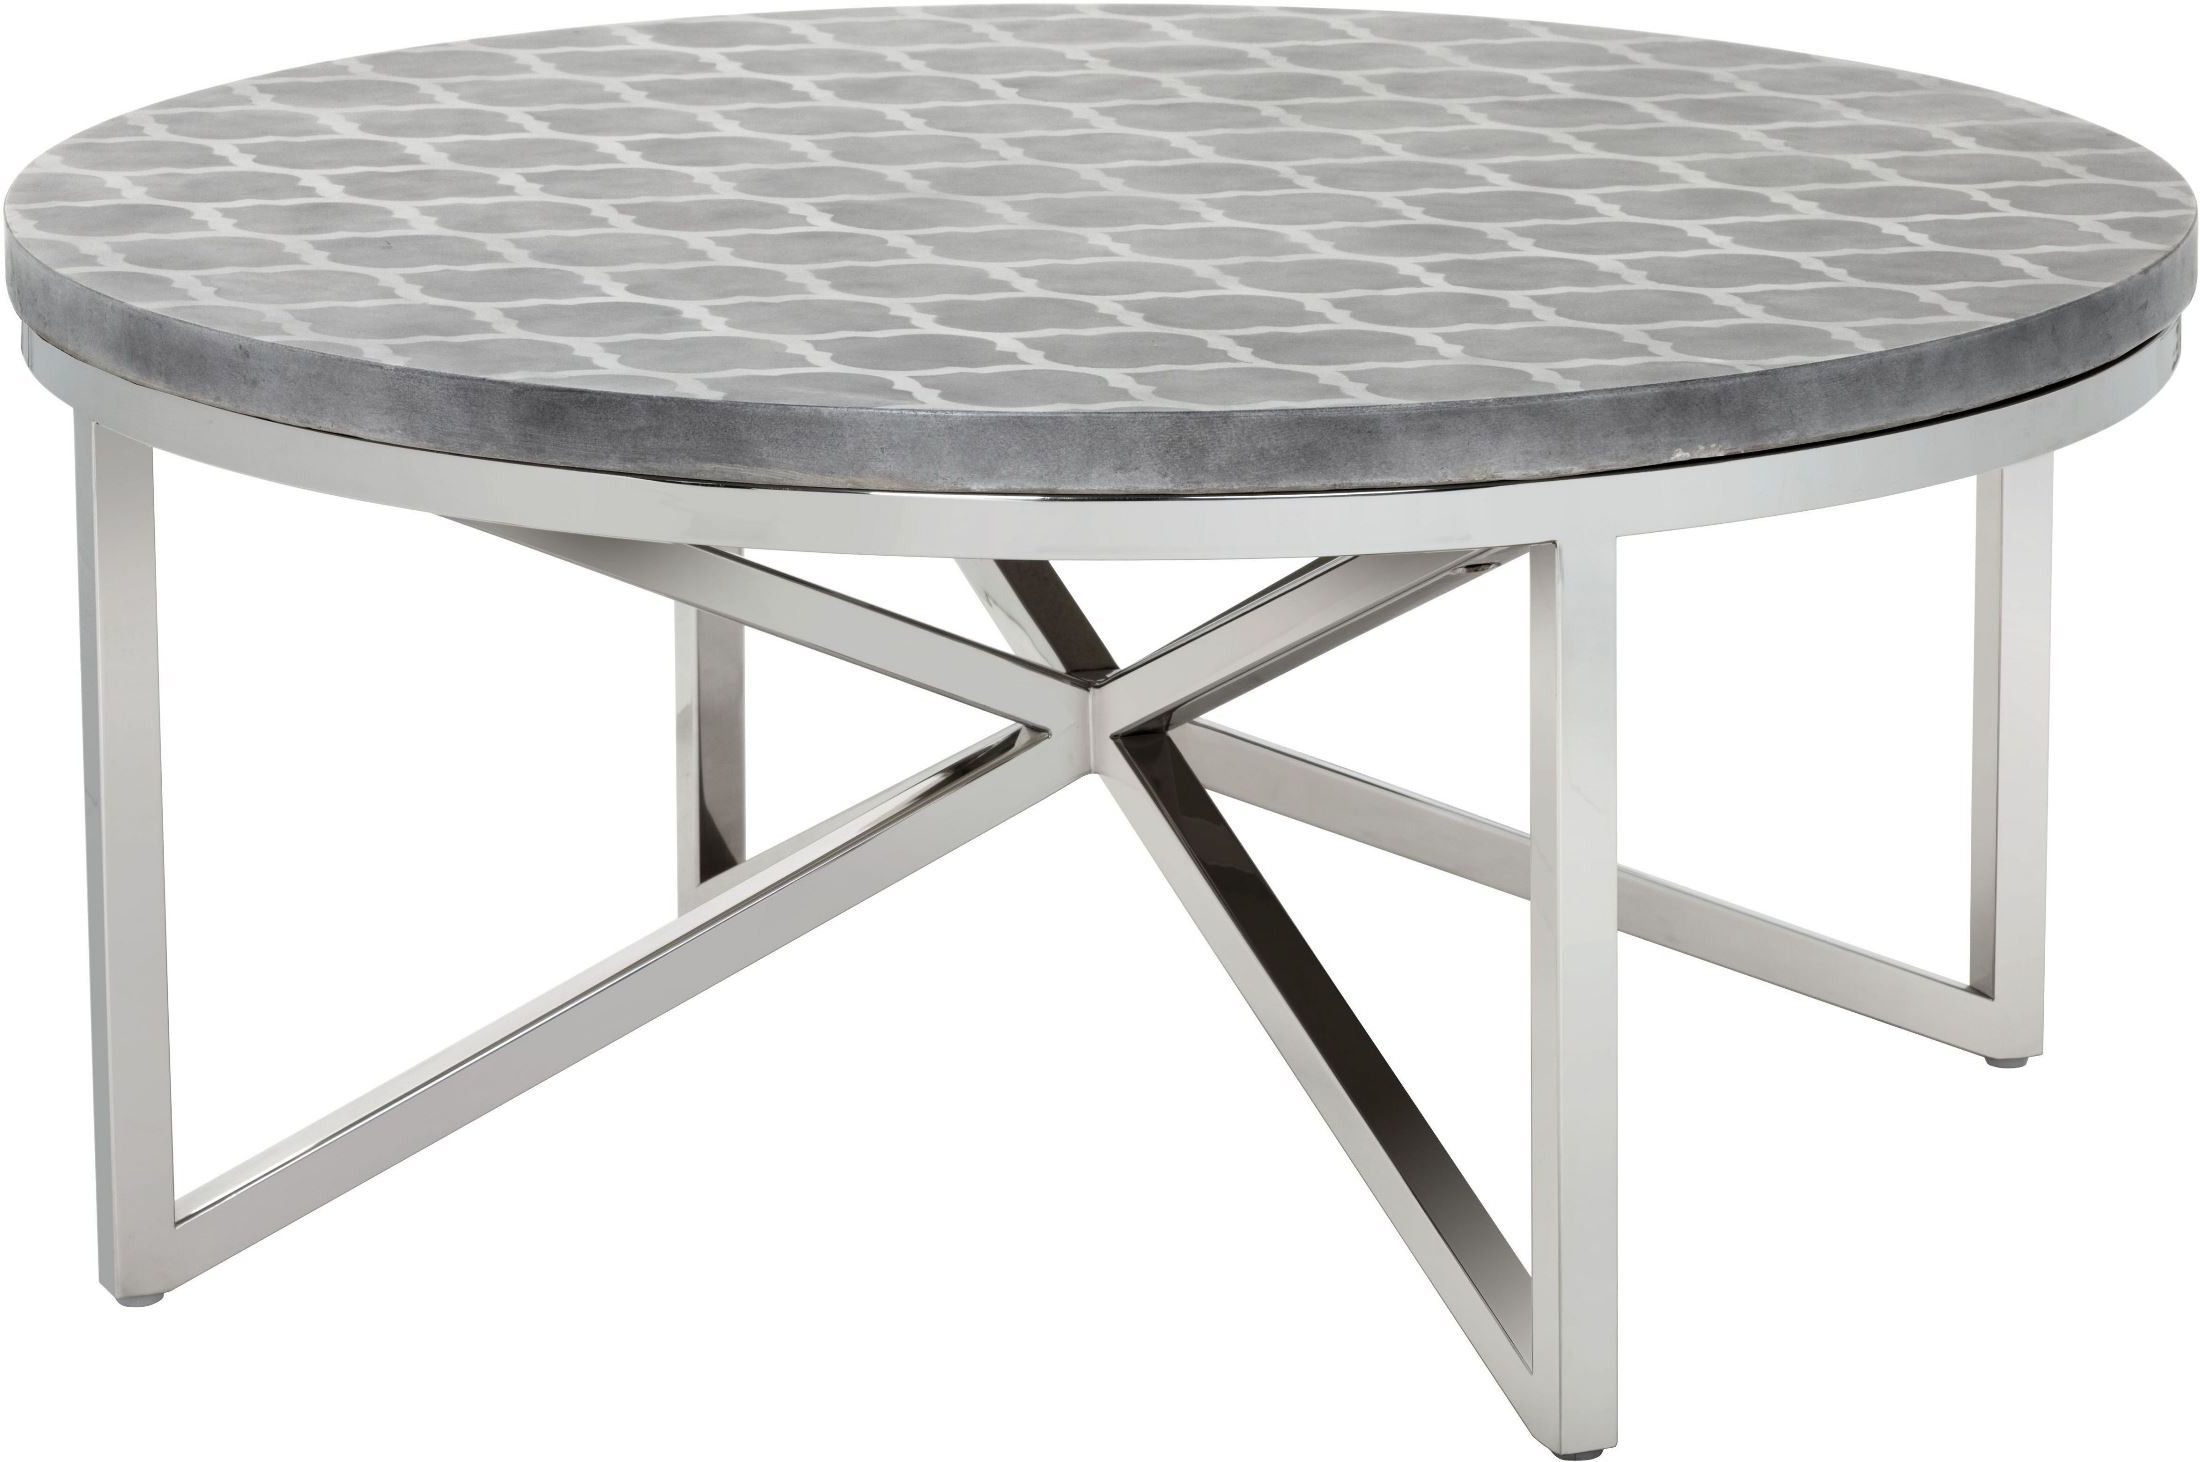 Dion Stencil Geometric Coffee Table, 101431, Sunpan Modern Throughout Recent Geometric White Coffee Tables (View 15 of 20)